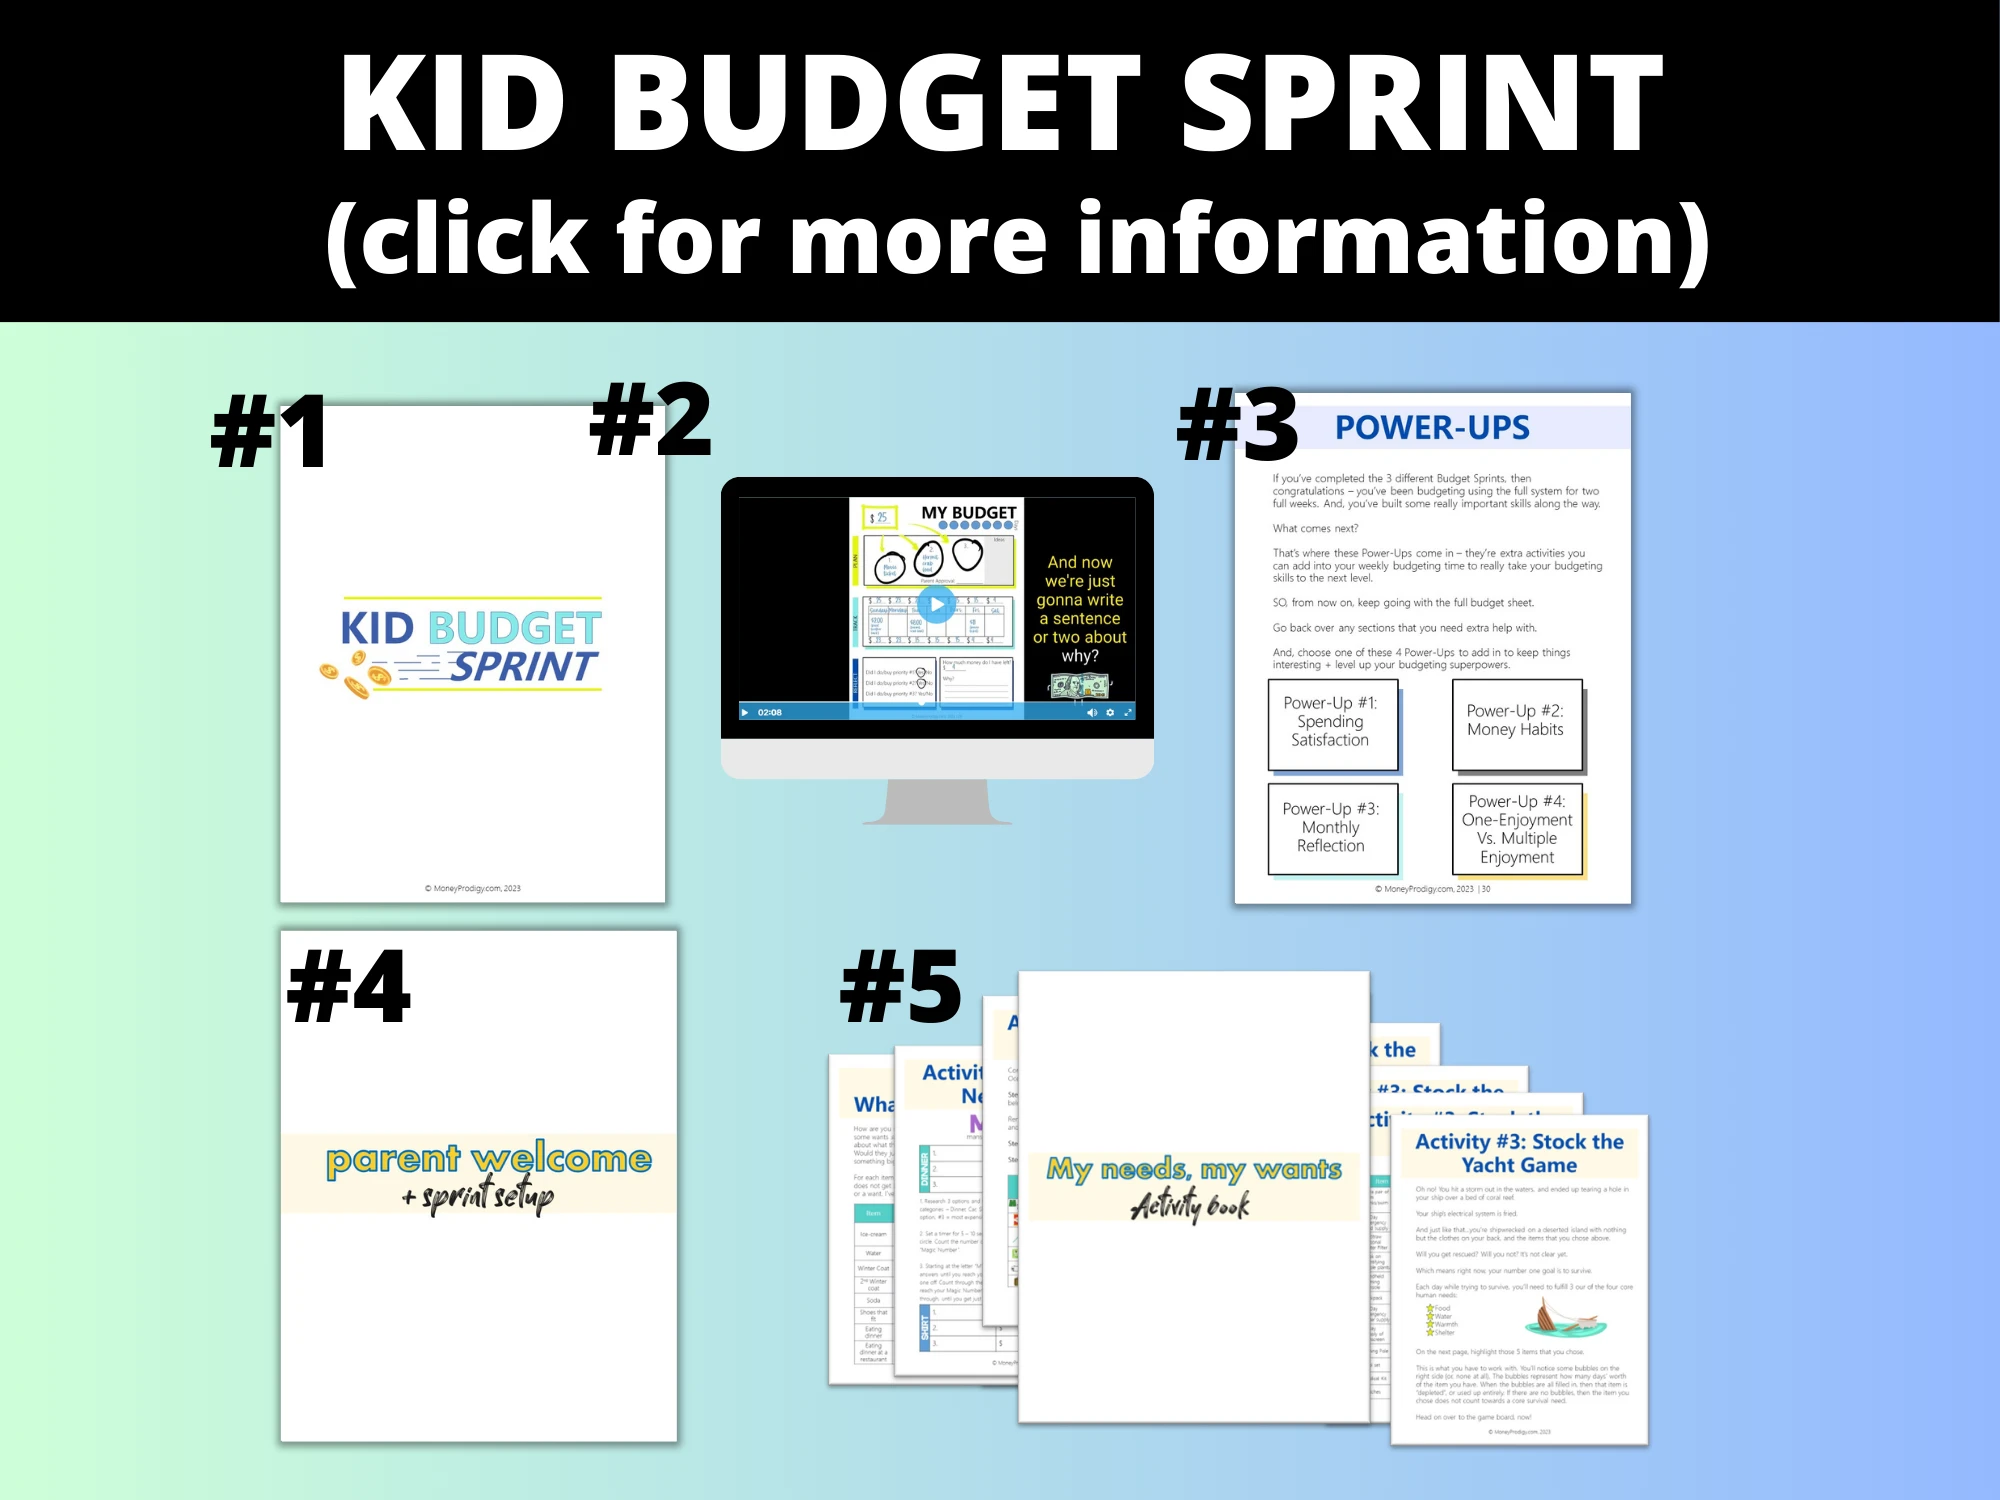 Kid Budget Sprint graphic showing all that's included in the product